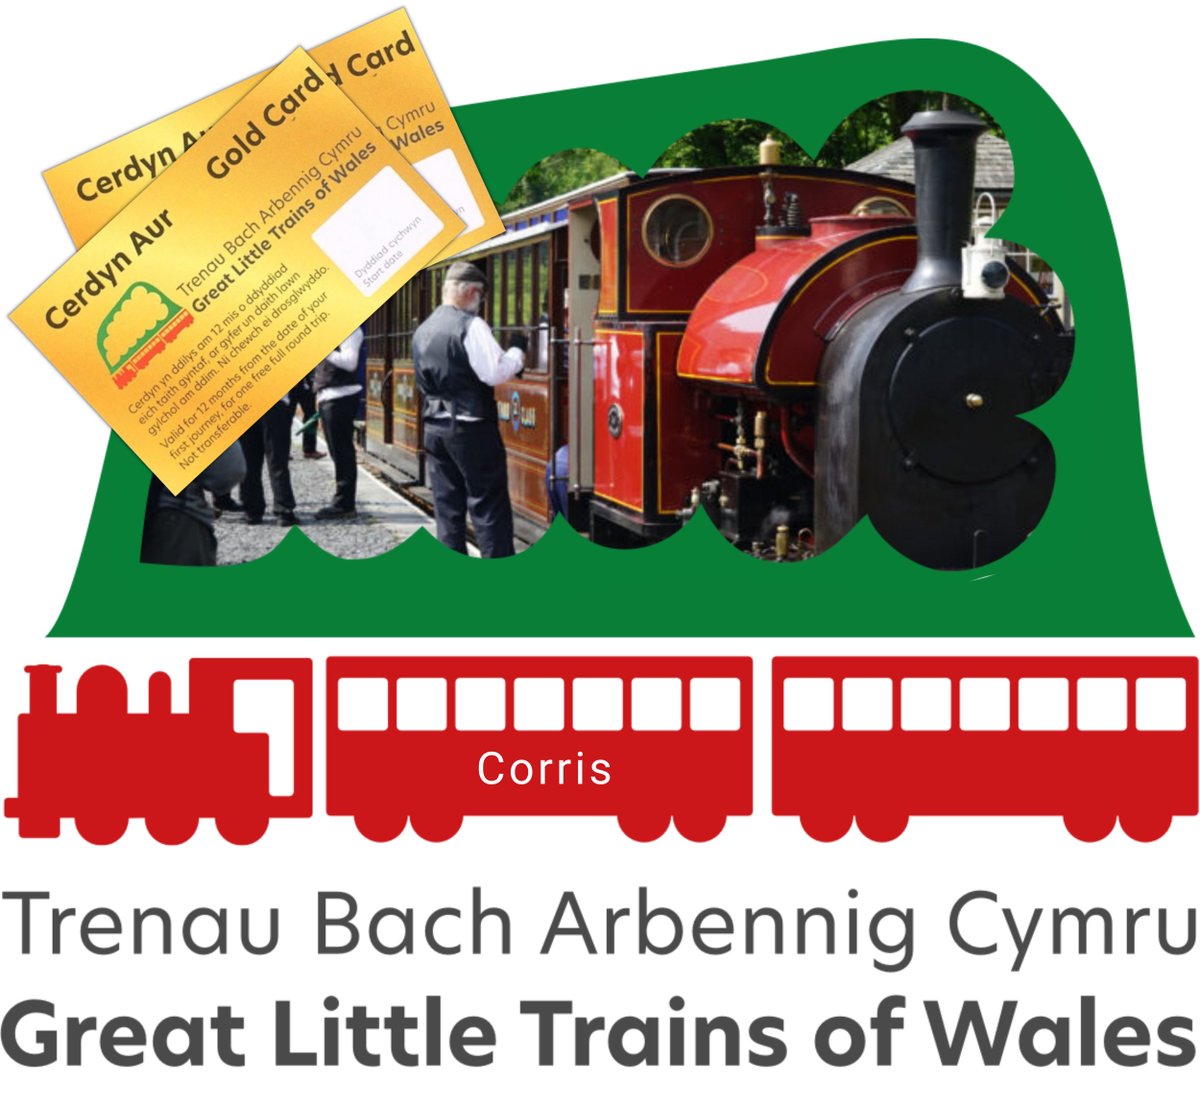 🎟️ 11 std returns on 11 magnificent railways all on 1 card! 🚂 Plan your golden ticket Gr8 adventure #goldcard, cost £152 till Sun 23/04 🔗 loom.ly/oE8uHOs 📸 @CorrisRailway #23offGOLDCARDfor23days2023 #heritagerail #railway #wales #23off2023 #corris #corrisrailway